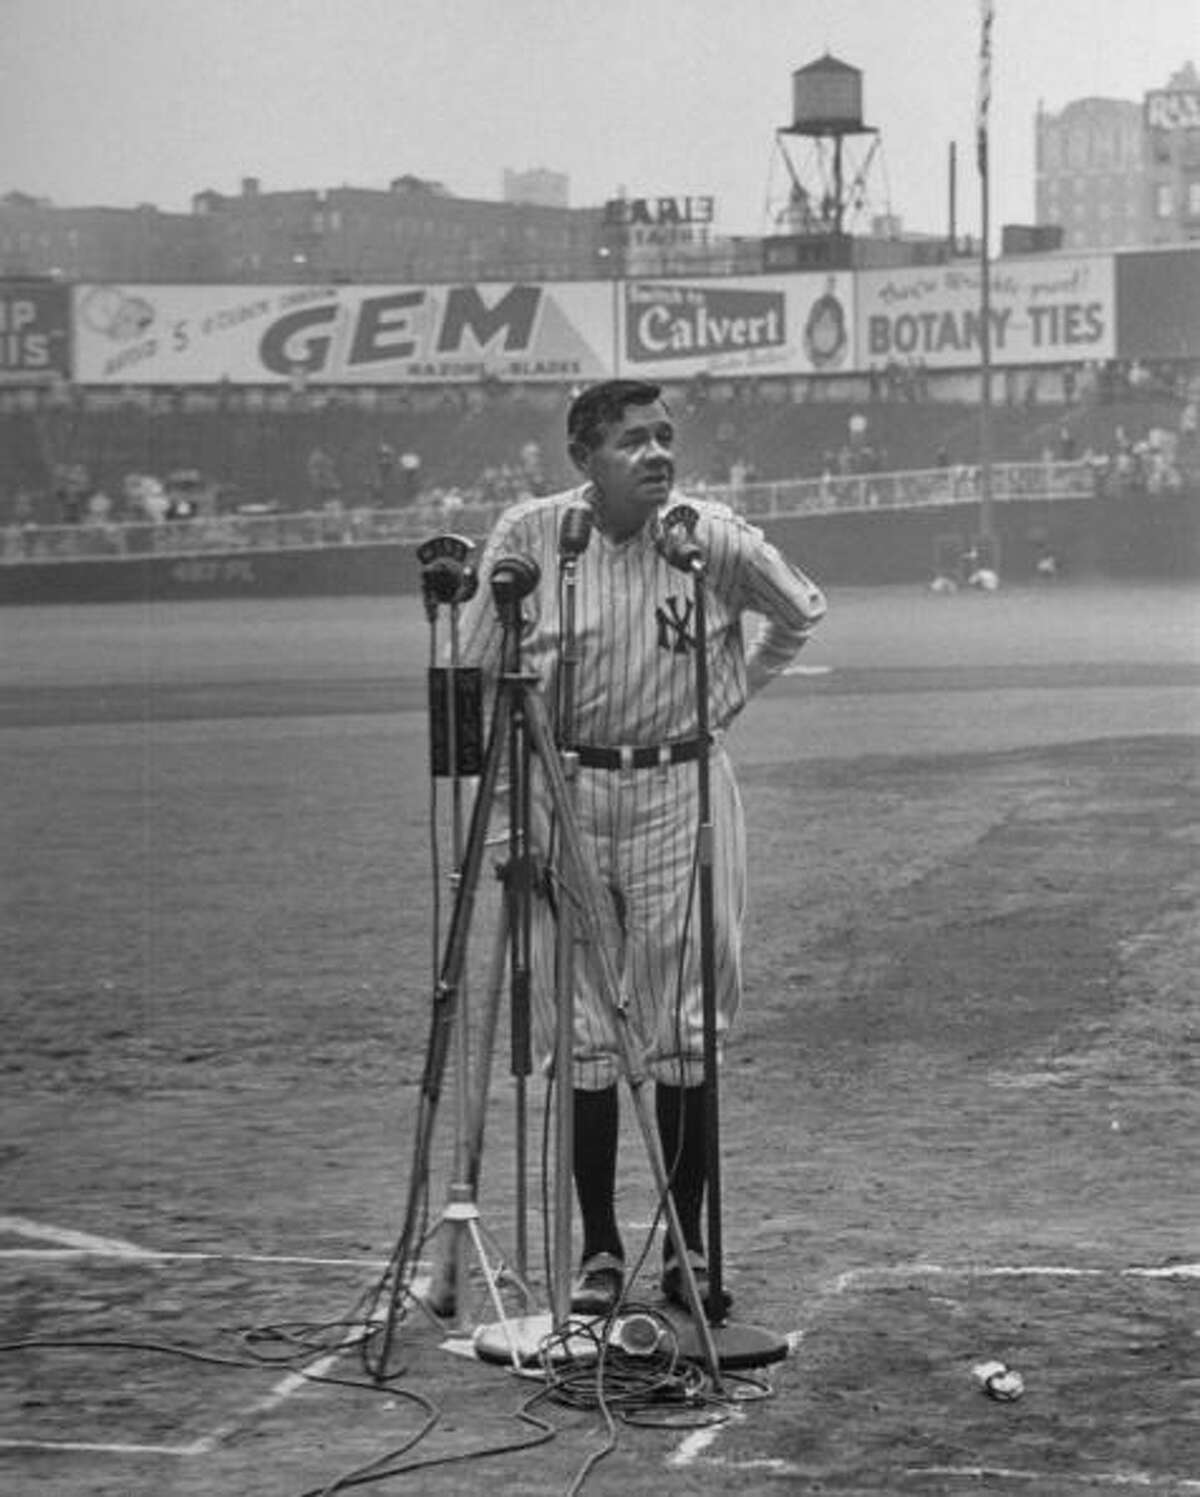 Babe Ruth makes his final appearance at Yankee Stadium on June 13